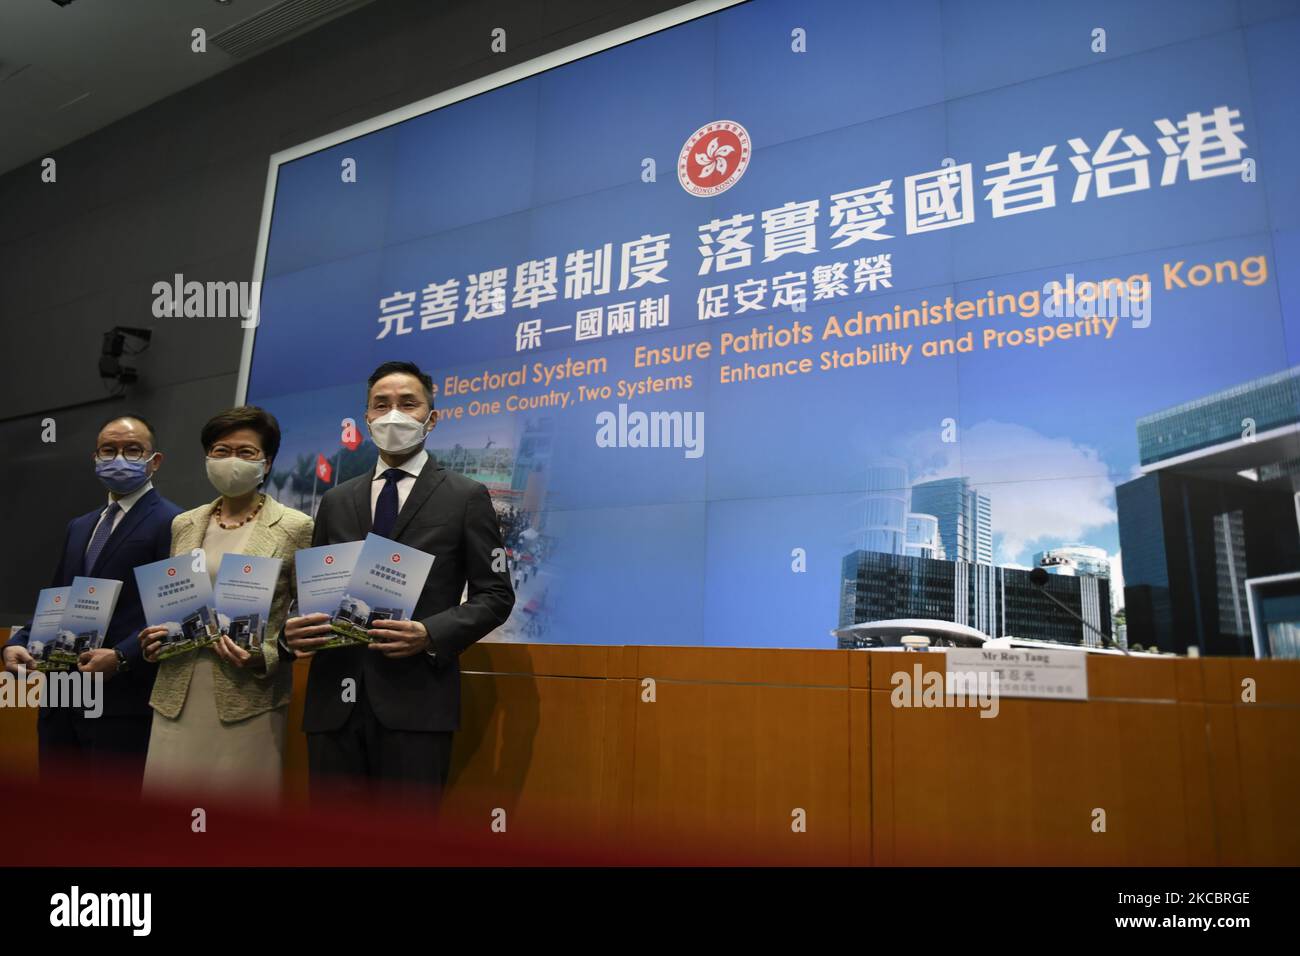 From Left to Right Mr. Eric Tsang Secretary for Constitutional and Mainland Affairs , Ms Carrie Lam Hong Kong Chief Executive , Mr Roy Tang Permanent Secretary for Constitutional and Mainland Affairs, holds a booklet while posing for a photo before a press conference in Hong Kong, Tuesday, March 30, 2020. The National People's Congress Standing Committee (NPCSC) on Tuesday approved amendments to annexes 1 and 2 of Hong Kong's Basic Law to pave the way for a drastic overhaul of the SAR's electoral system, local member Tam Yiu-chung said One of the major revamps includes expanding the role of th Stock Photo